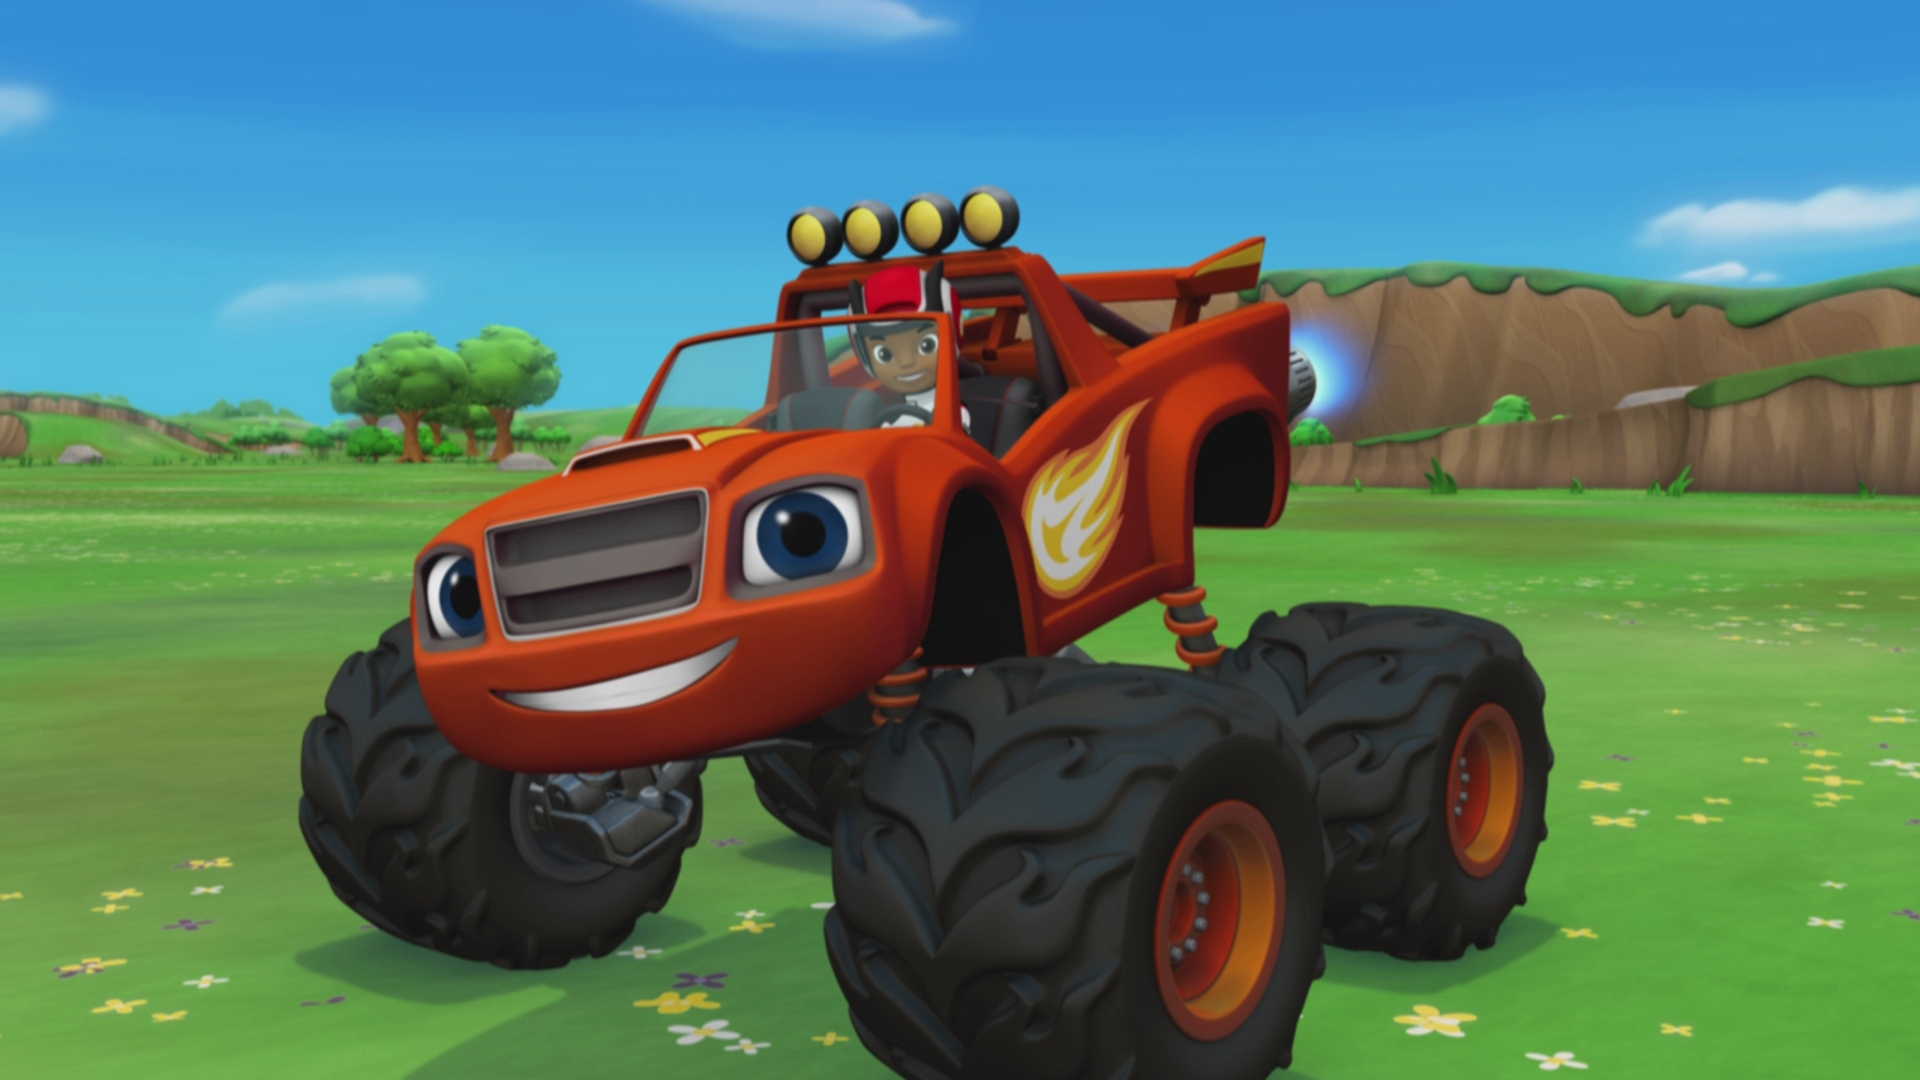 Watch Blaze and the Monster Machines Streaming Online